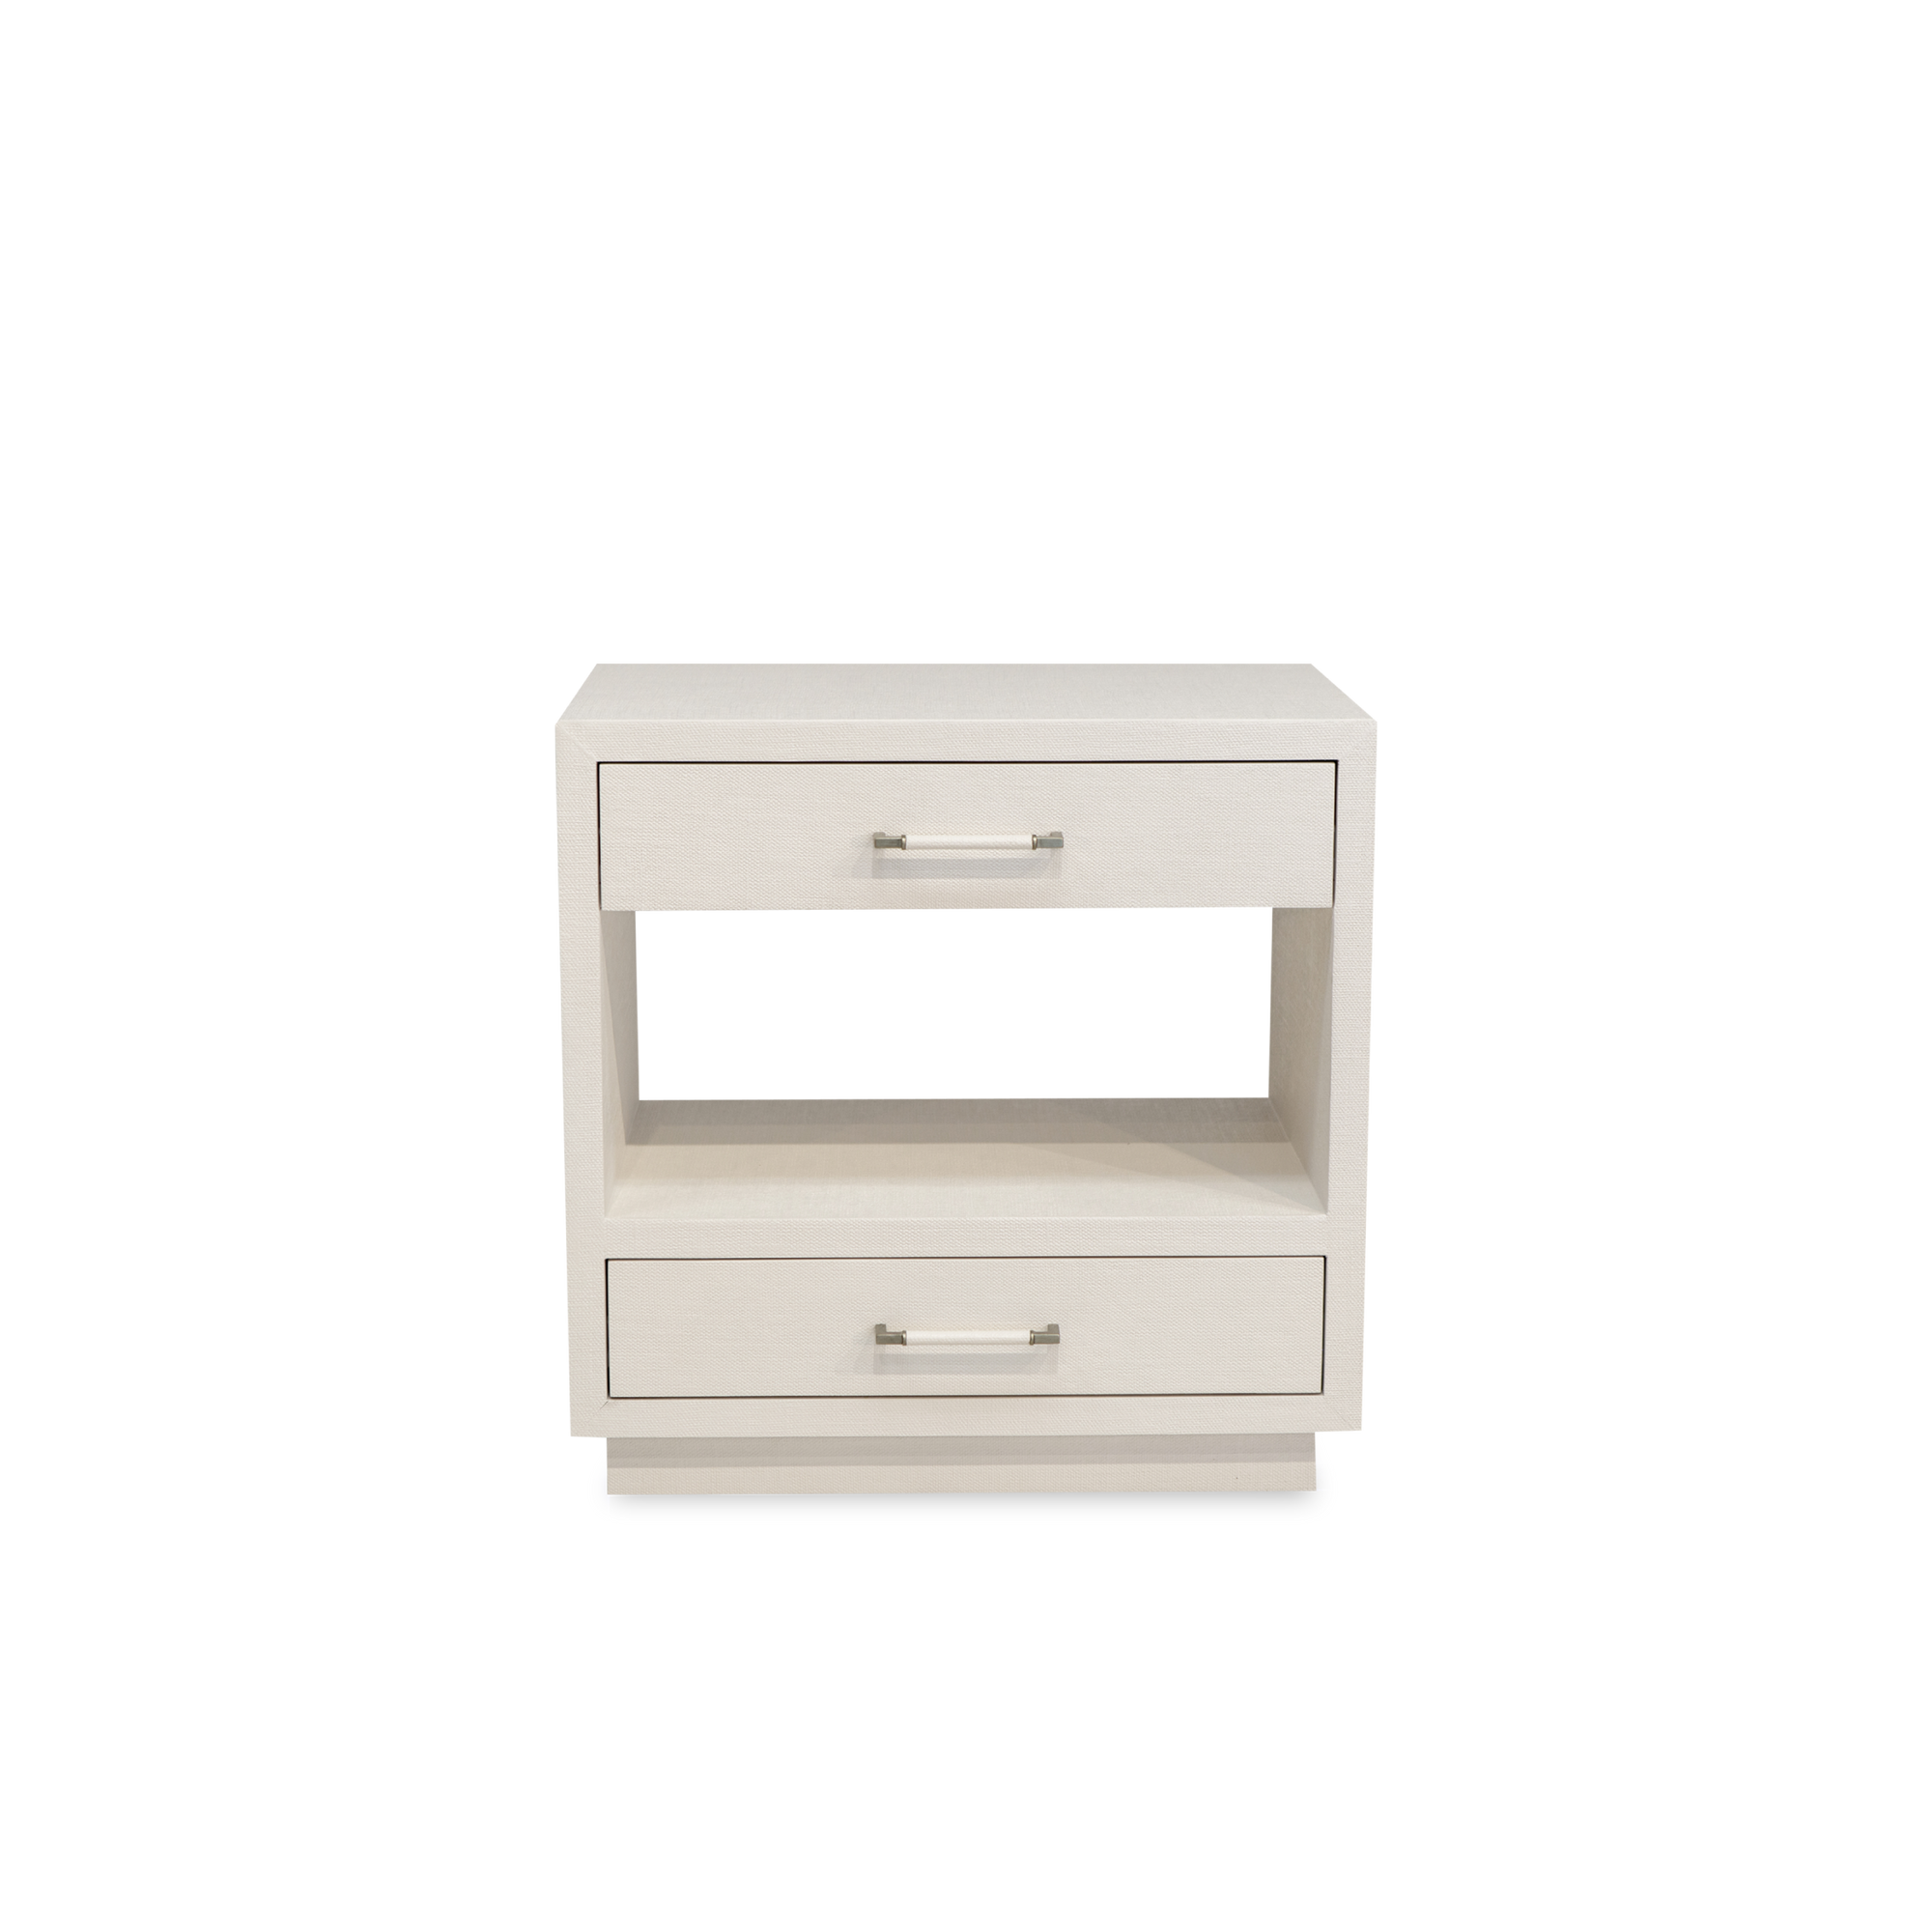 With its clean lines and textured surface, the Bancroft Nightstand offers the ultimate contemporary style for your bedroom.